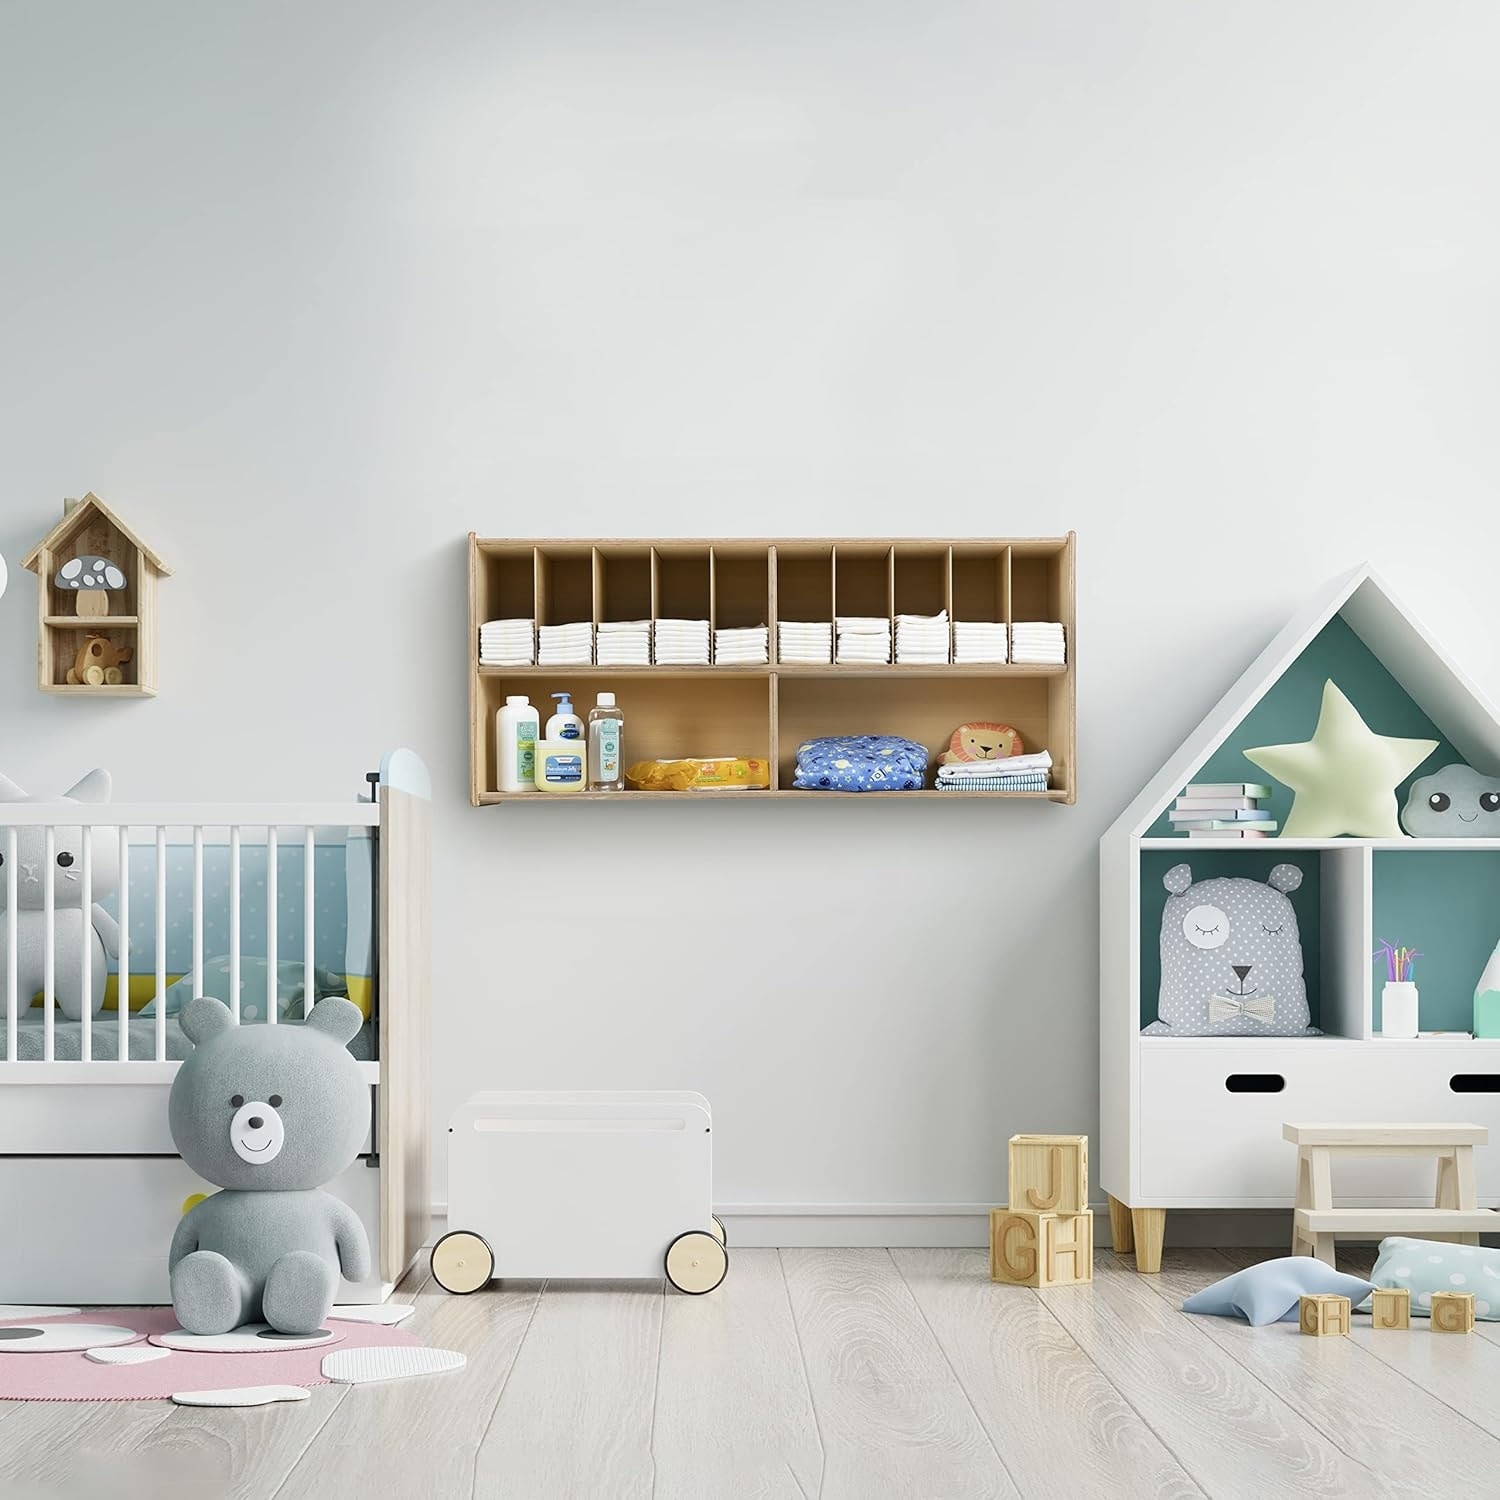 https://ak1.ostkcdn.com/images/products/is/images/direct/091732aa0857a2f35a71e413afc900ce588cb837/RRI-Goods-Wall-Mount-Baby-Diaper-Caddy-Organizer-with-Storage-Unit%2C-100%25-Birch-Plywood-Storing-Kids-Diapers%2C-Wipes-in-Nursery.jpg